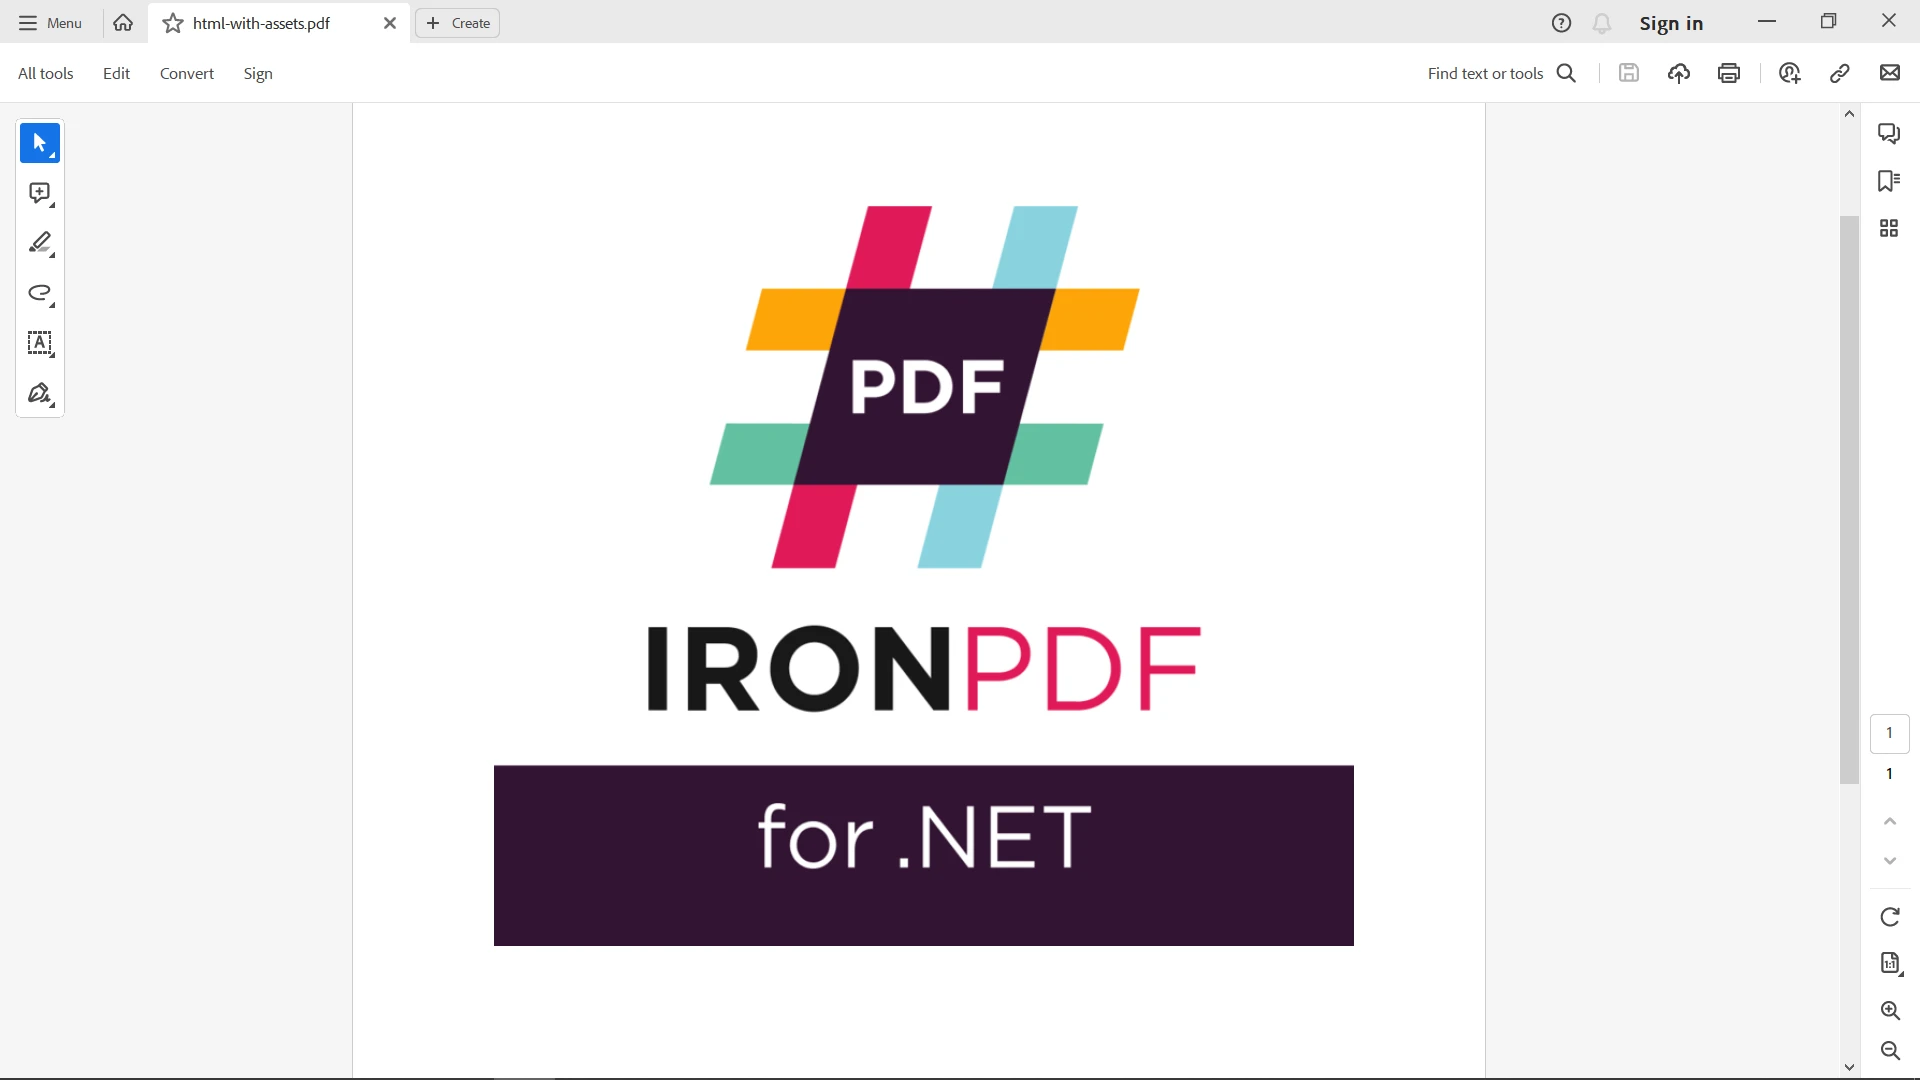 iTextSharp HTML to PDF With CSS Styles C# Example vs (IronPDF) Figure 10 - Output PDF for advanced HTMLtoPDF conversion using IronPDF for .NET Library.